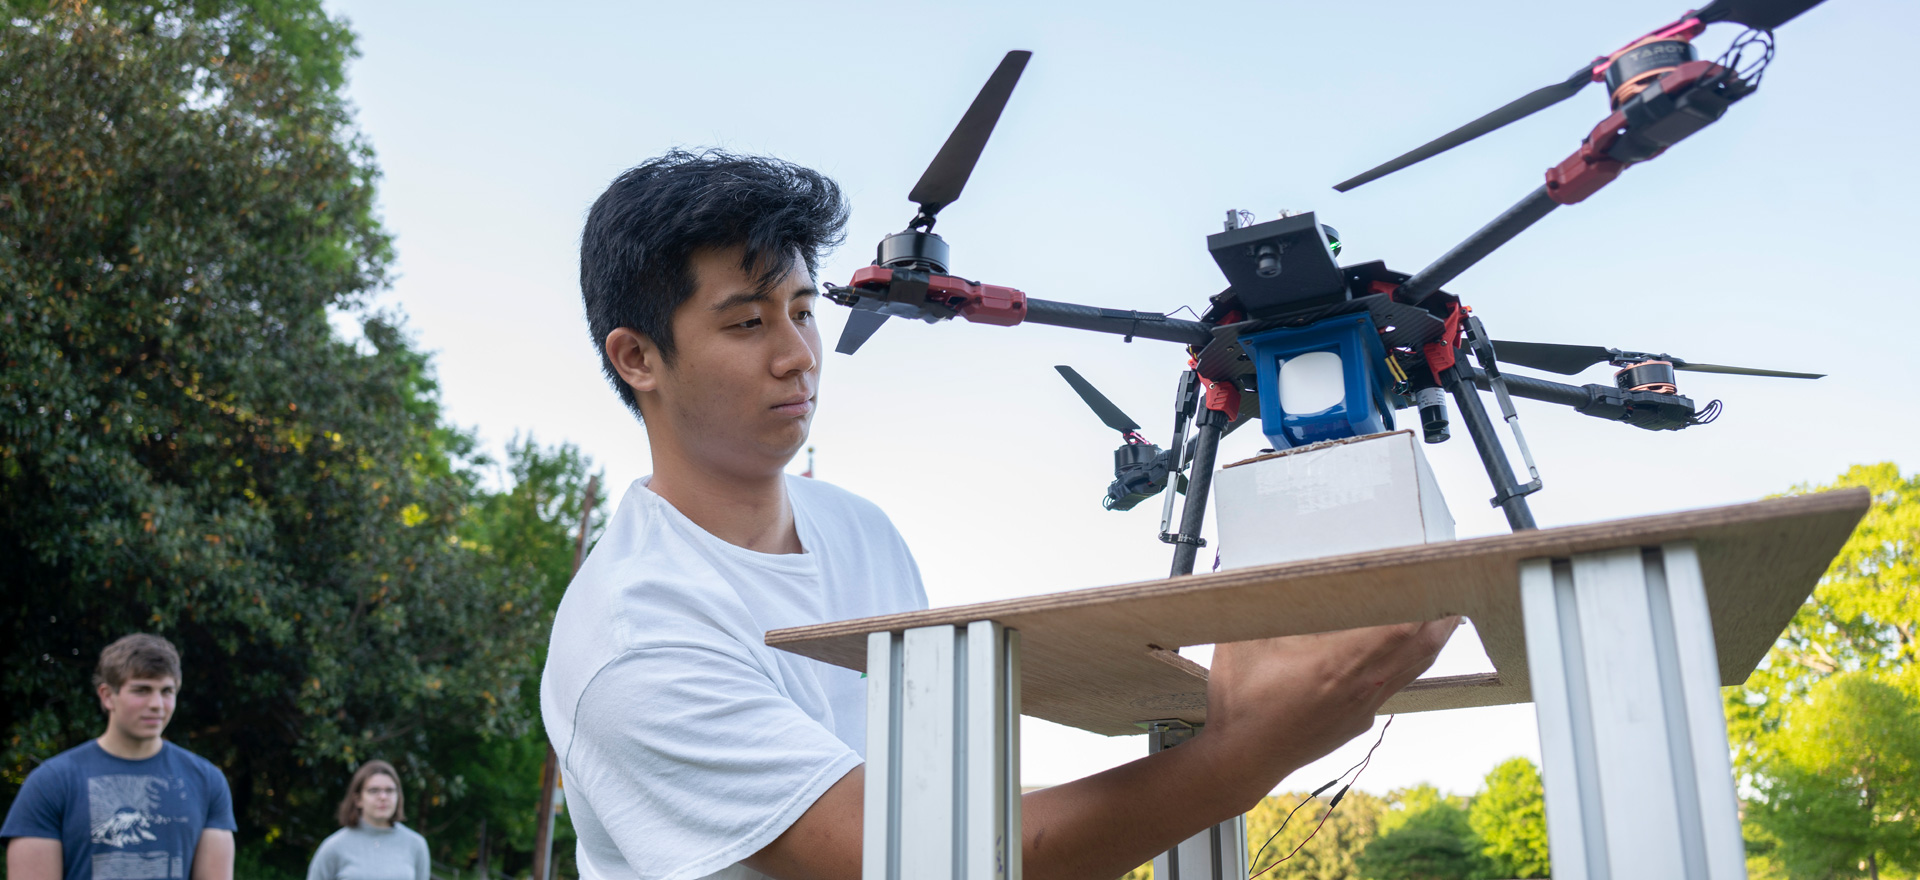 Student makes adjustments to drone resting on small landing pad, outdoors in testing field.